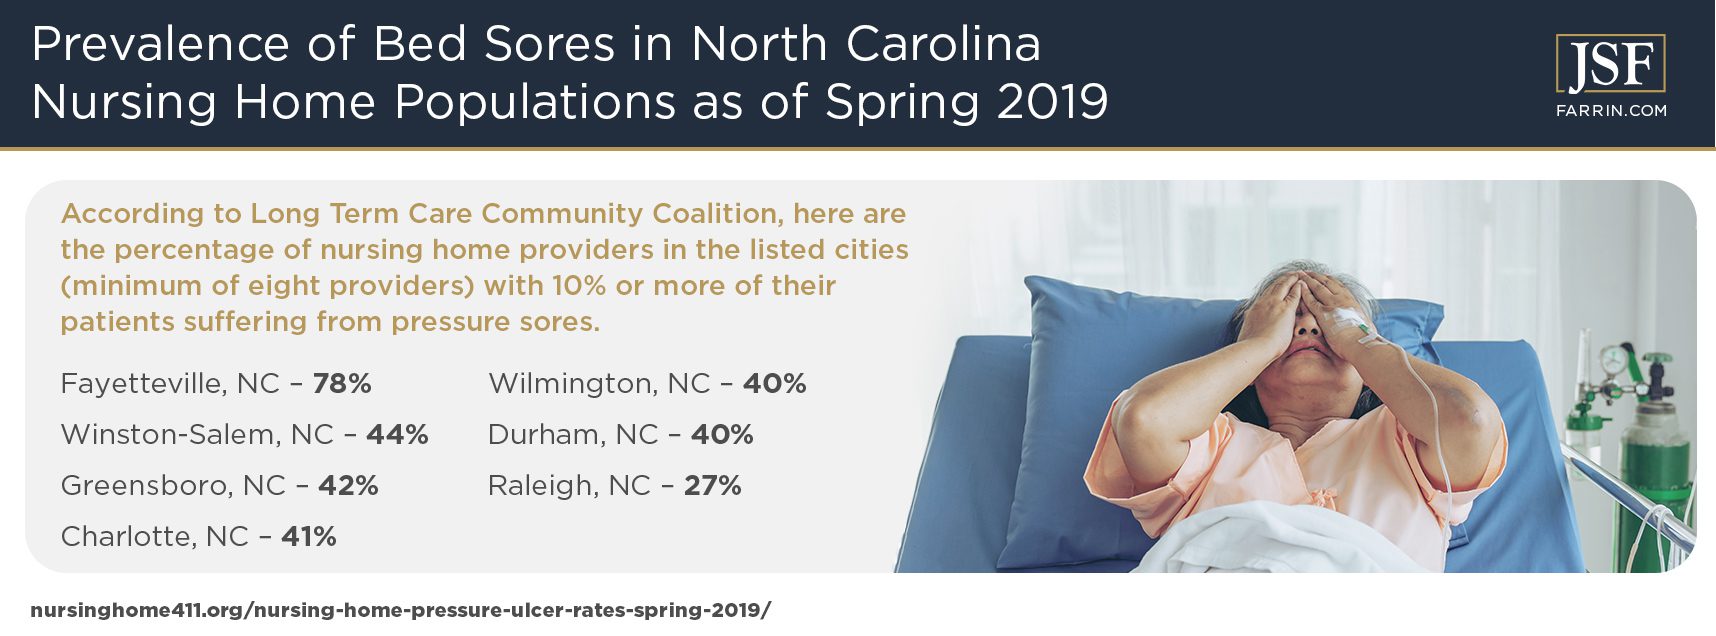 Prevalence of Bed Sores in Nursing Home Populations in North Carolina as of Spring 2019